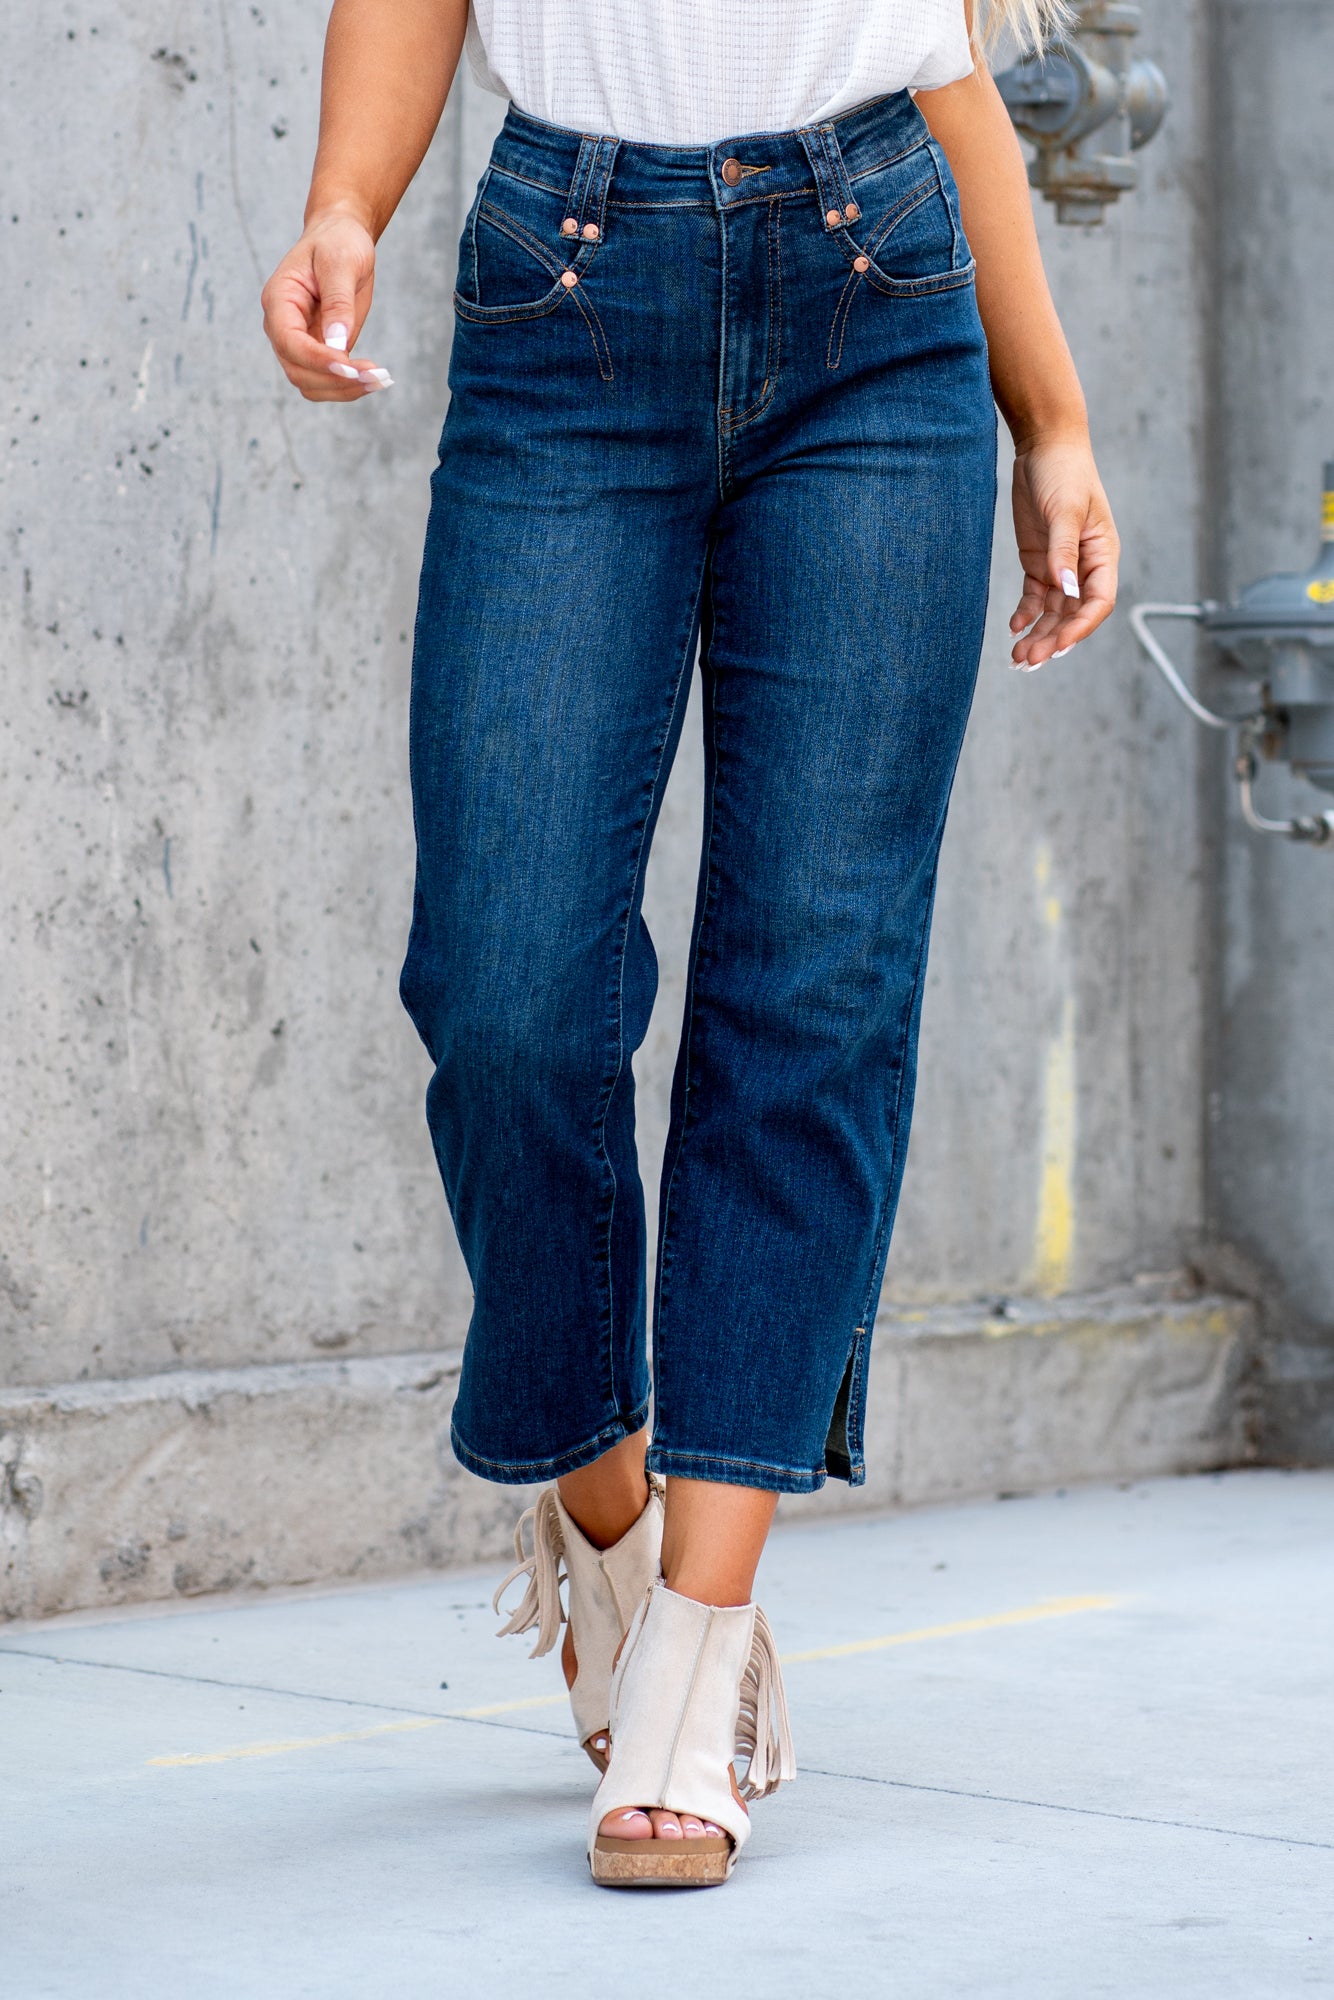 Cropped straight jeans - Women's fashion